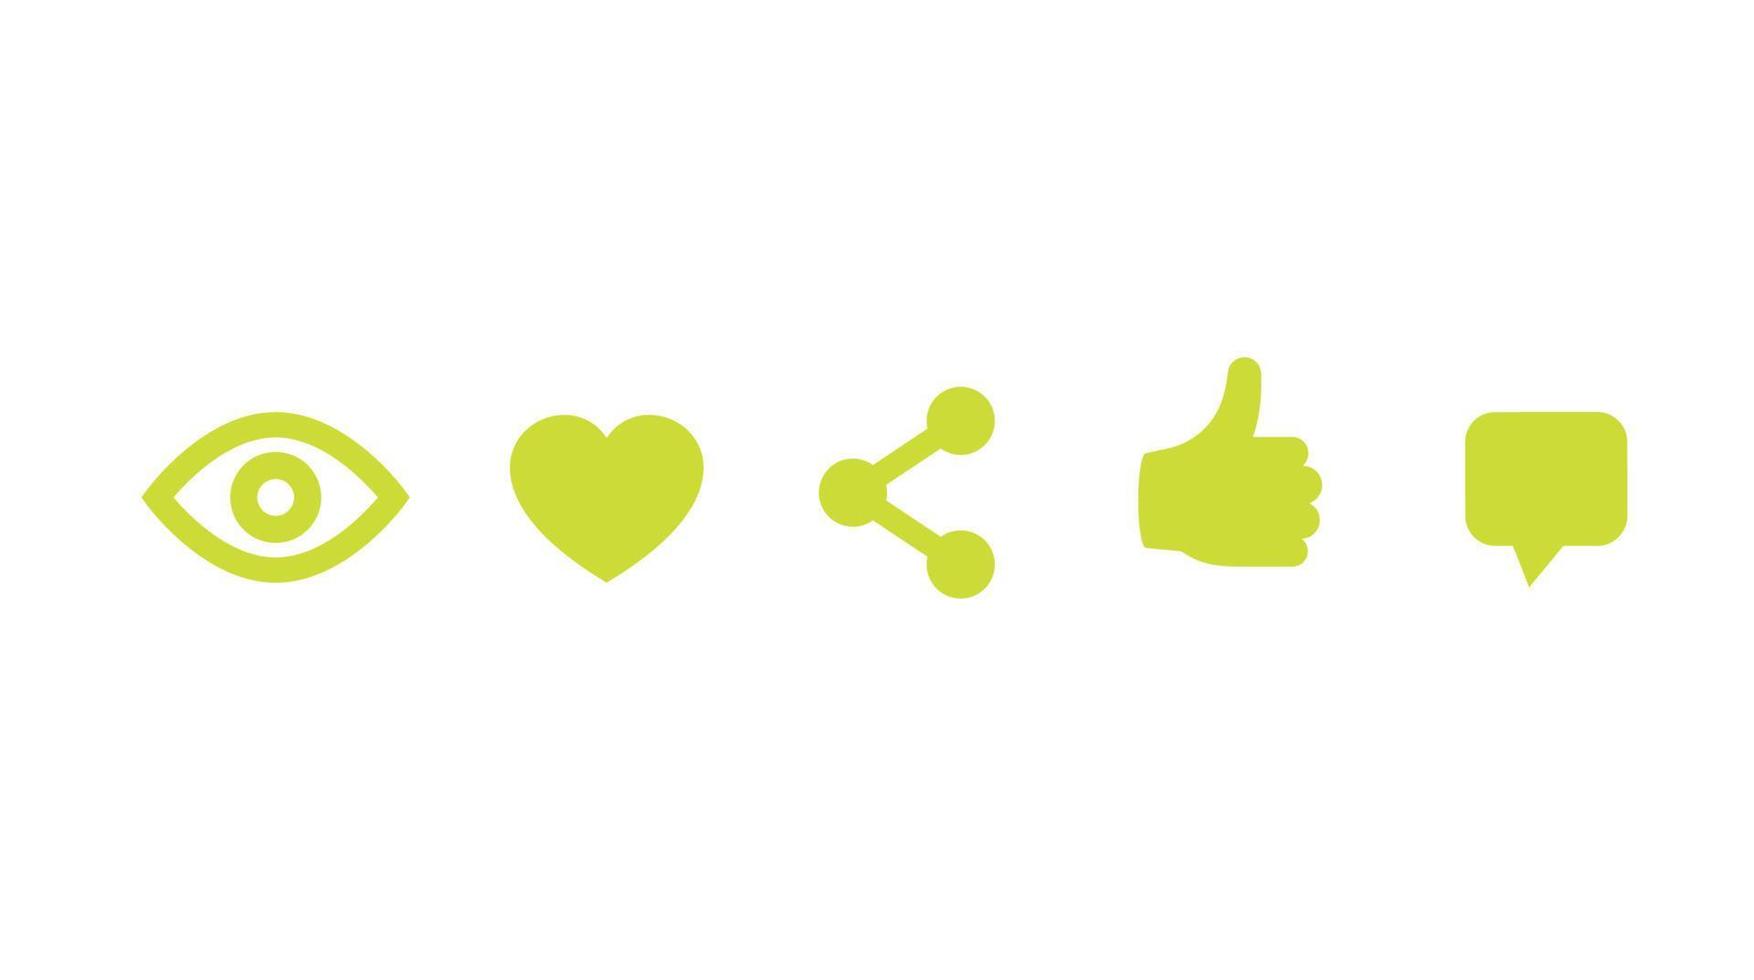 View, like, share, thumb up, comment icons on white vector